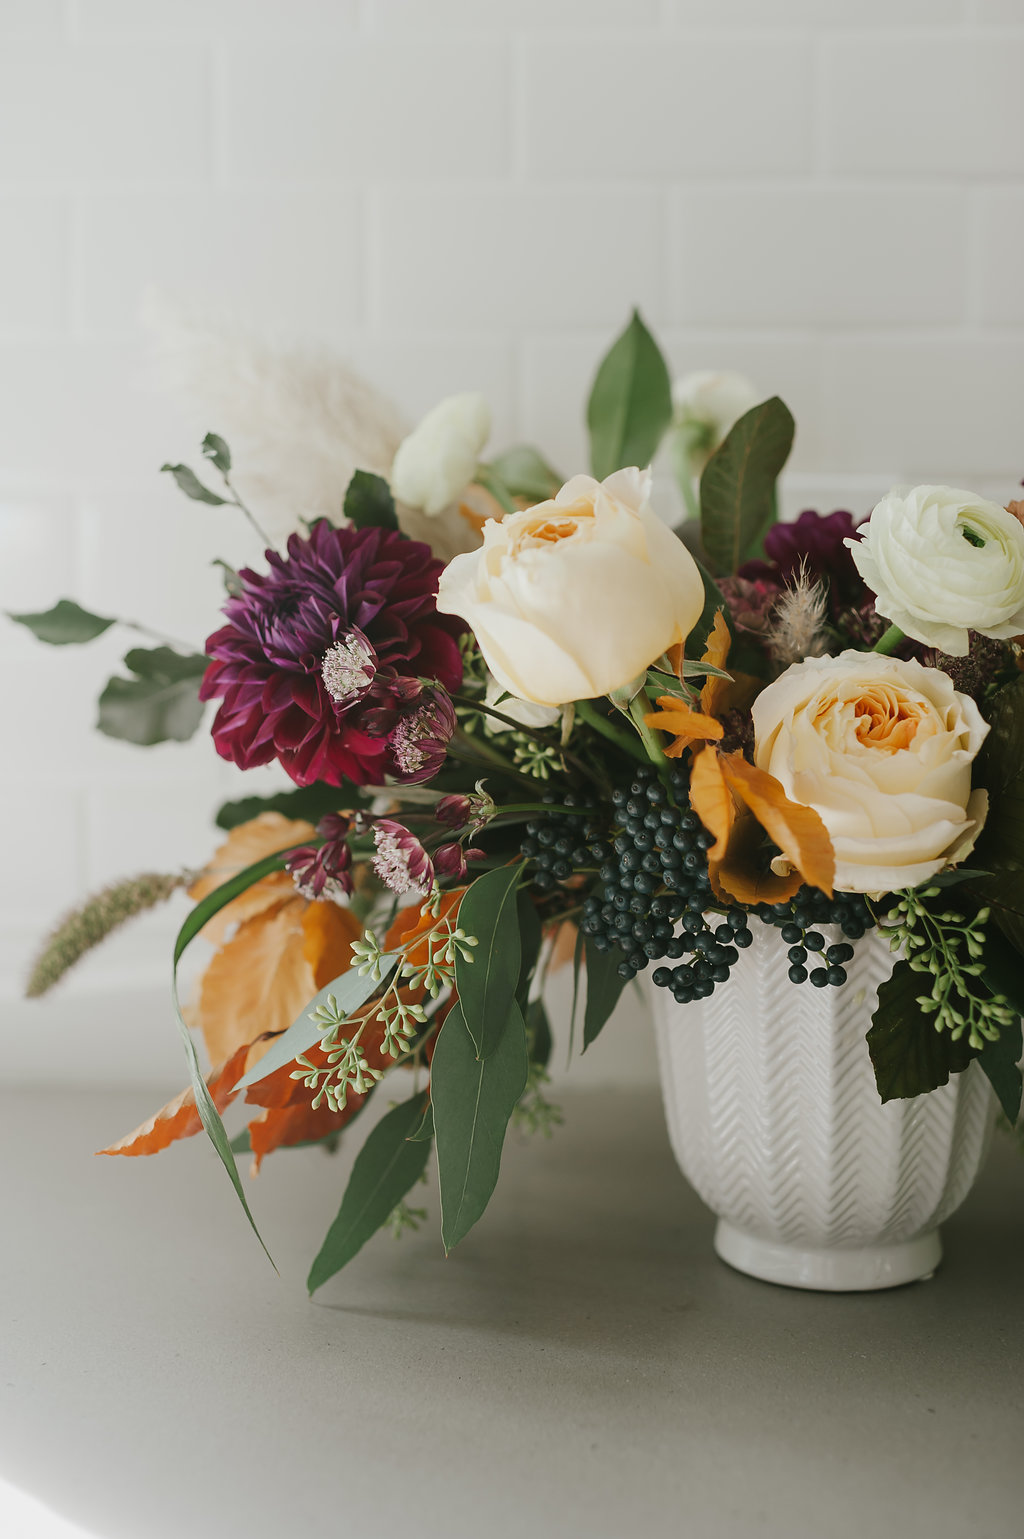 A DIY Fall Floral Arrangement with all the Deep Colors we Love